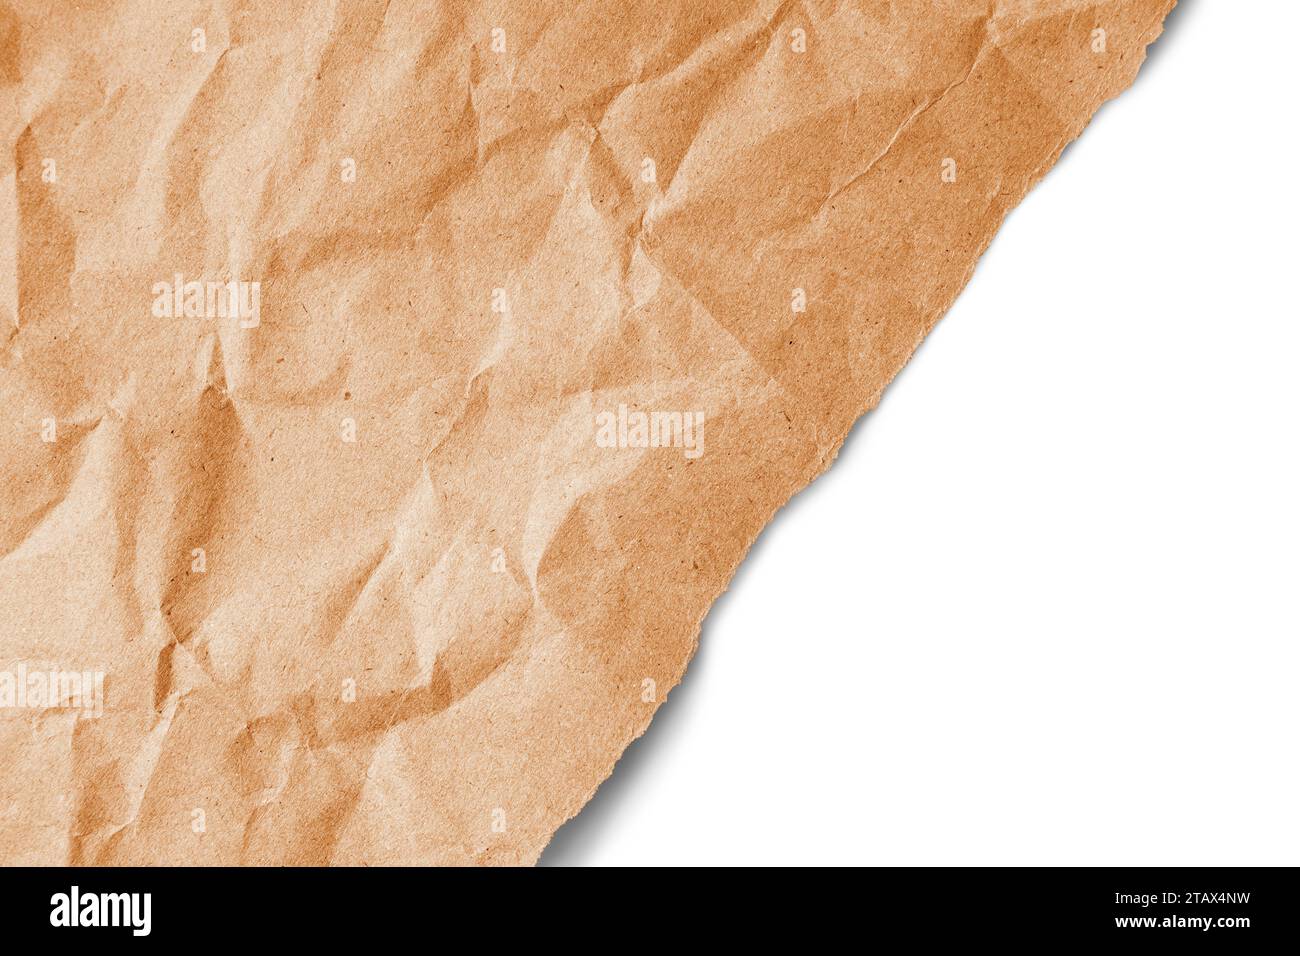 Detail of creased and wrinkled orange paper - Stock Image - F025